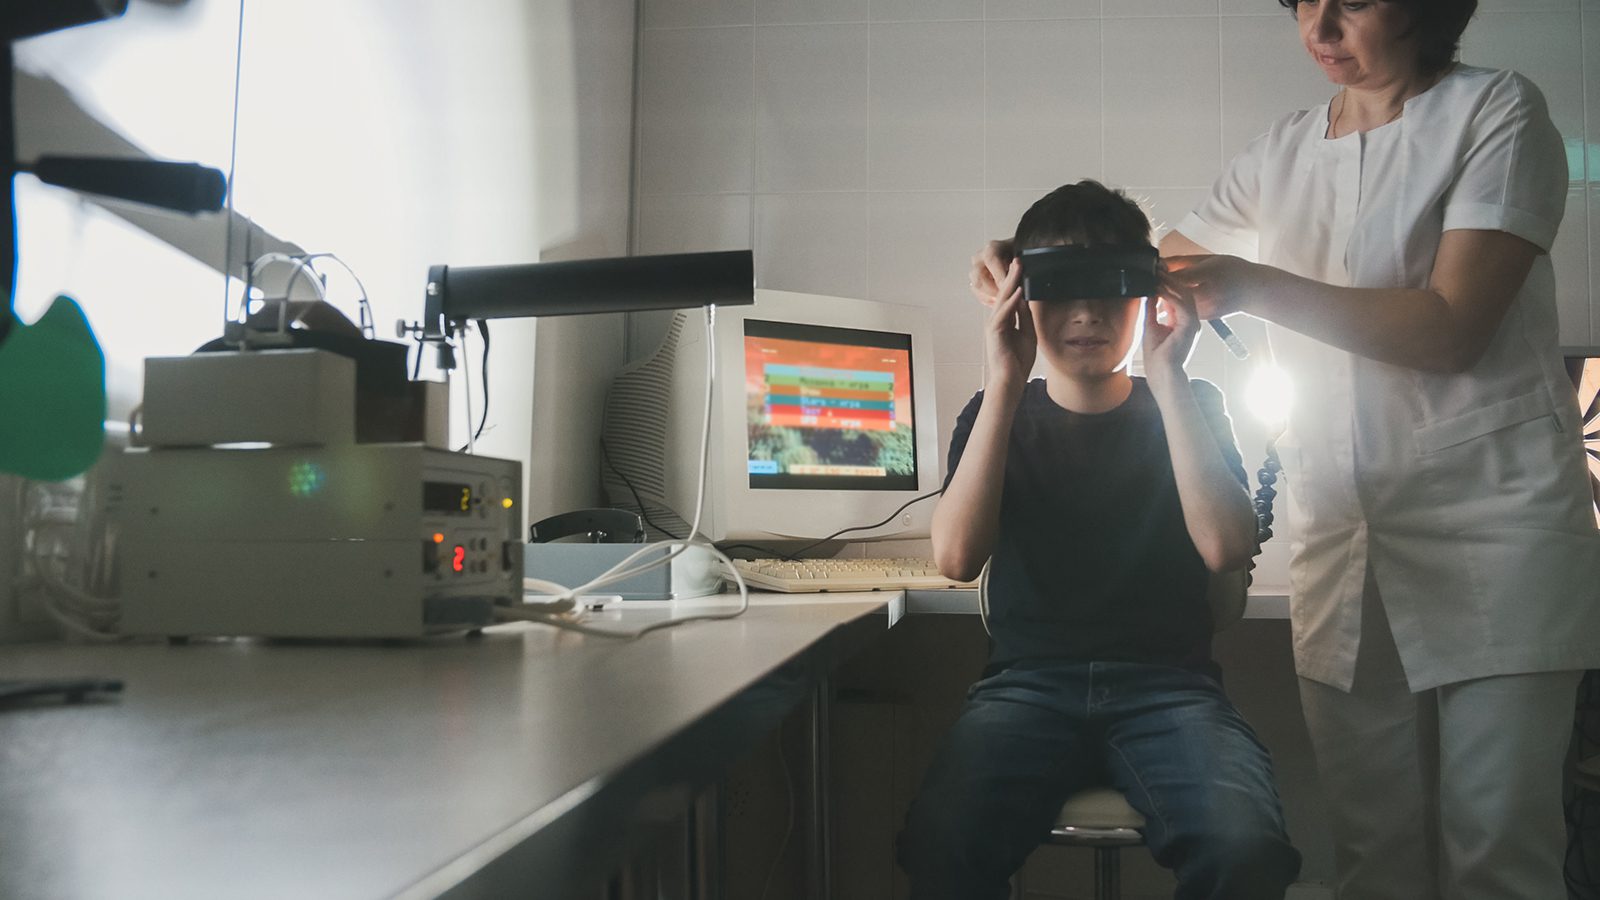 Scientists Use VR Games to Diagnose ADHD